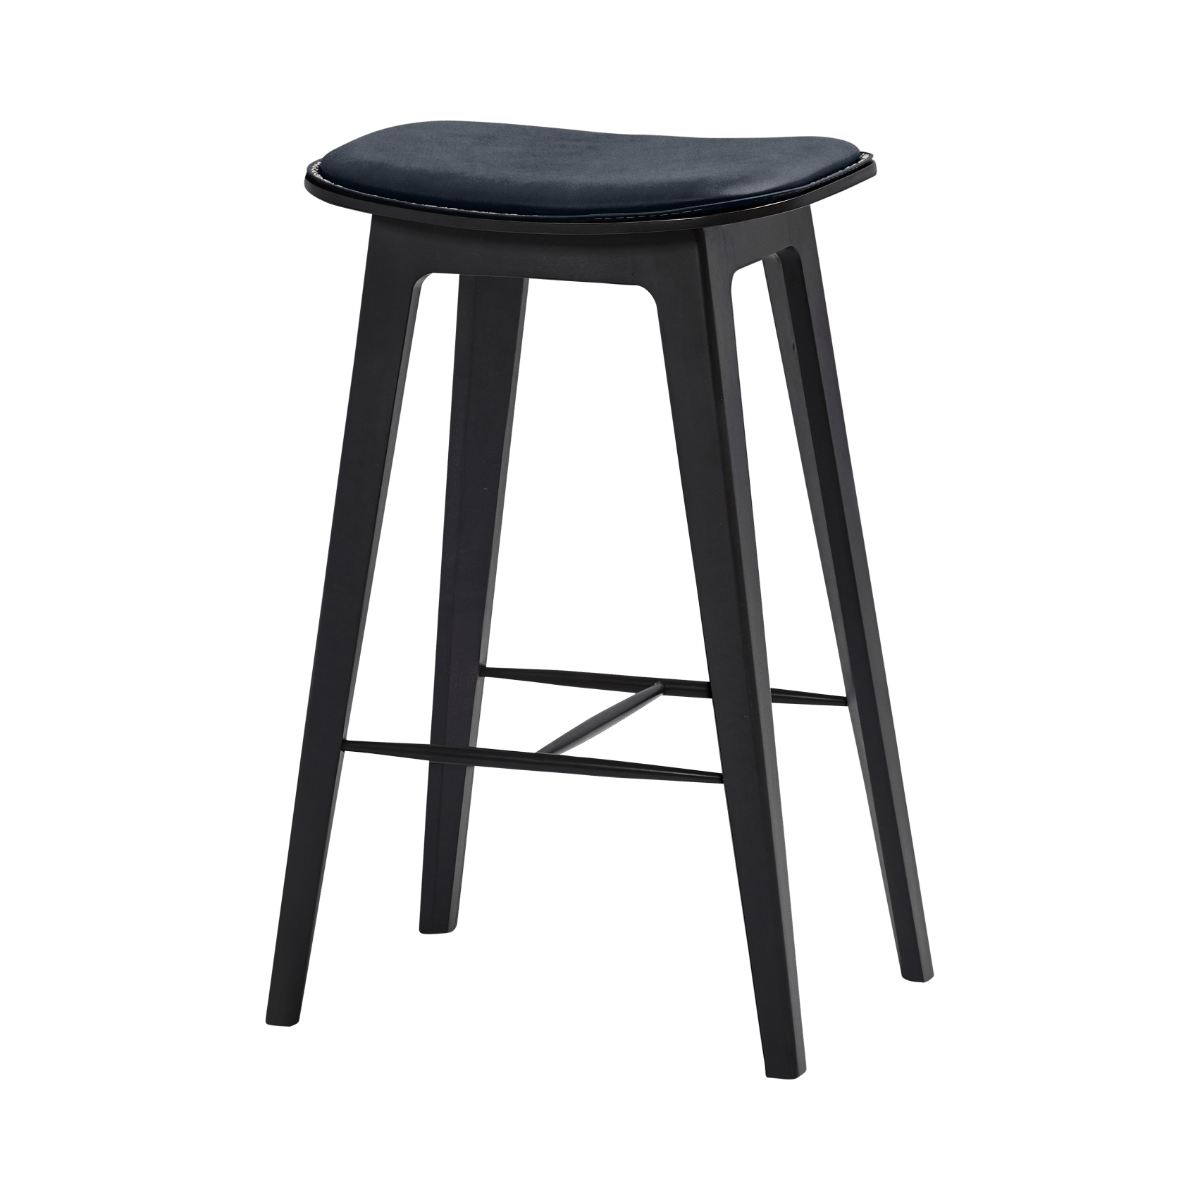 variant_8593215% | Nordic Bar Stool - Beech with stitches [Contract] - 73 cm Luna Carbon | SACKit